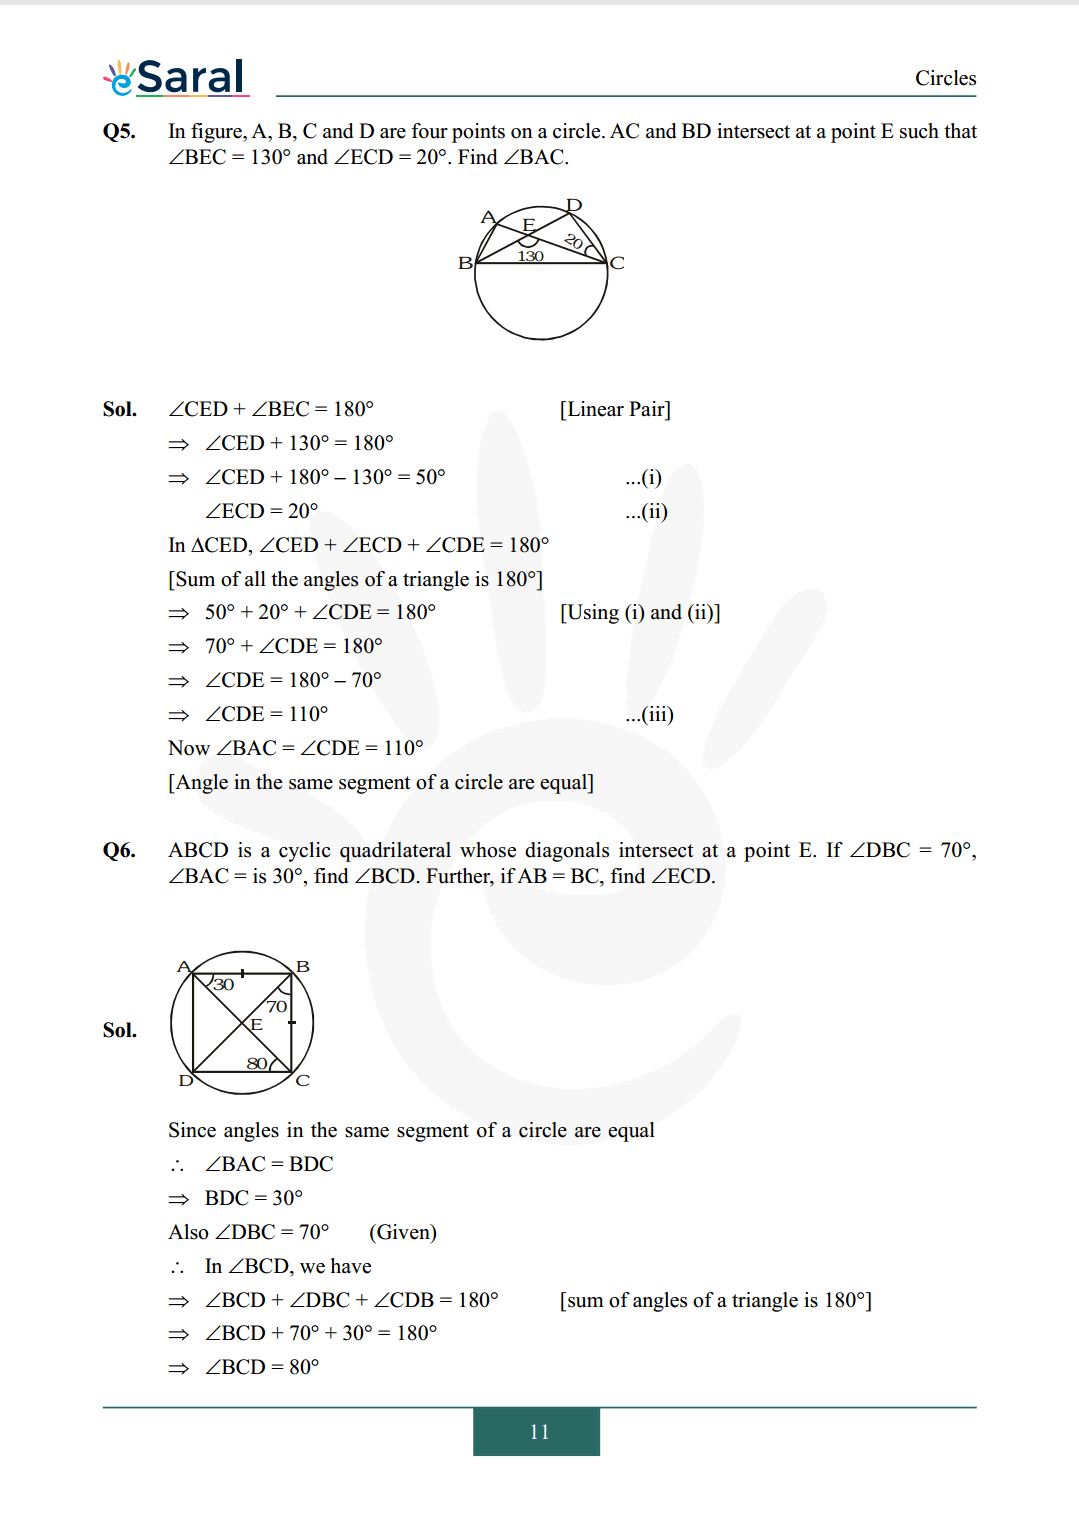 Class 9 maths chapter 10 exercise 10.5 solutions Image 3